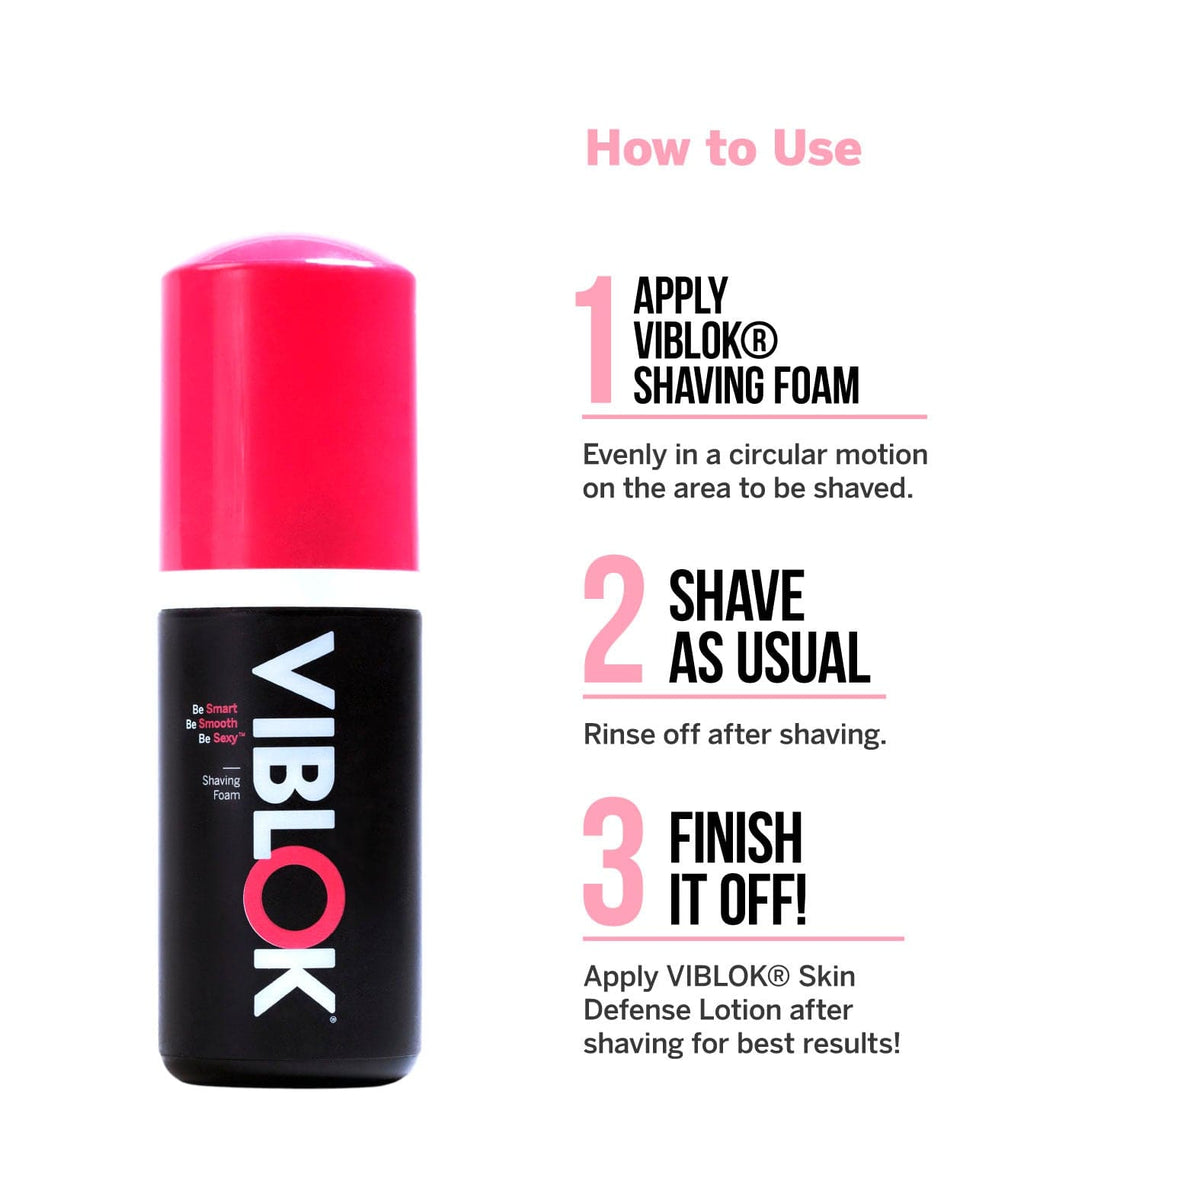 VIBLOK Shaving Foam bottle on the right side there is the step-by-step of How to Use